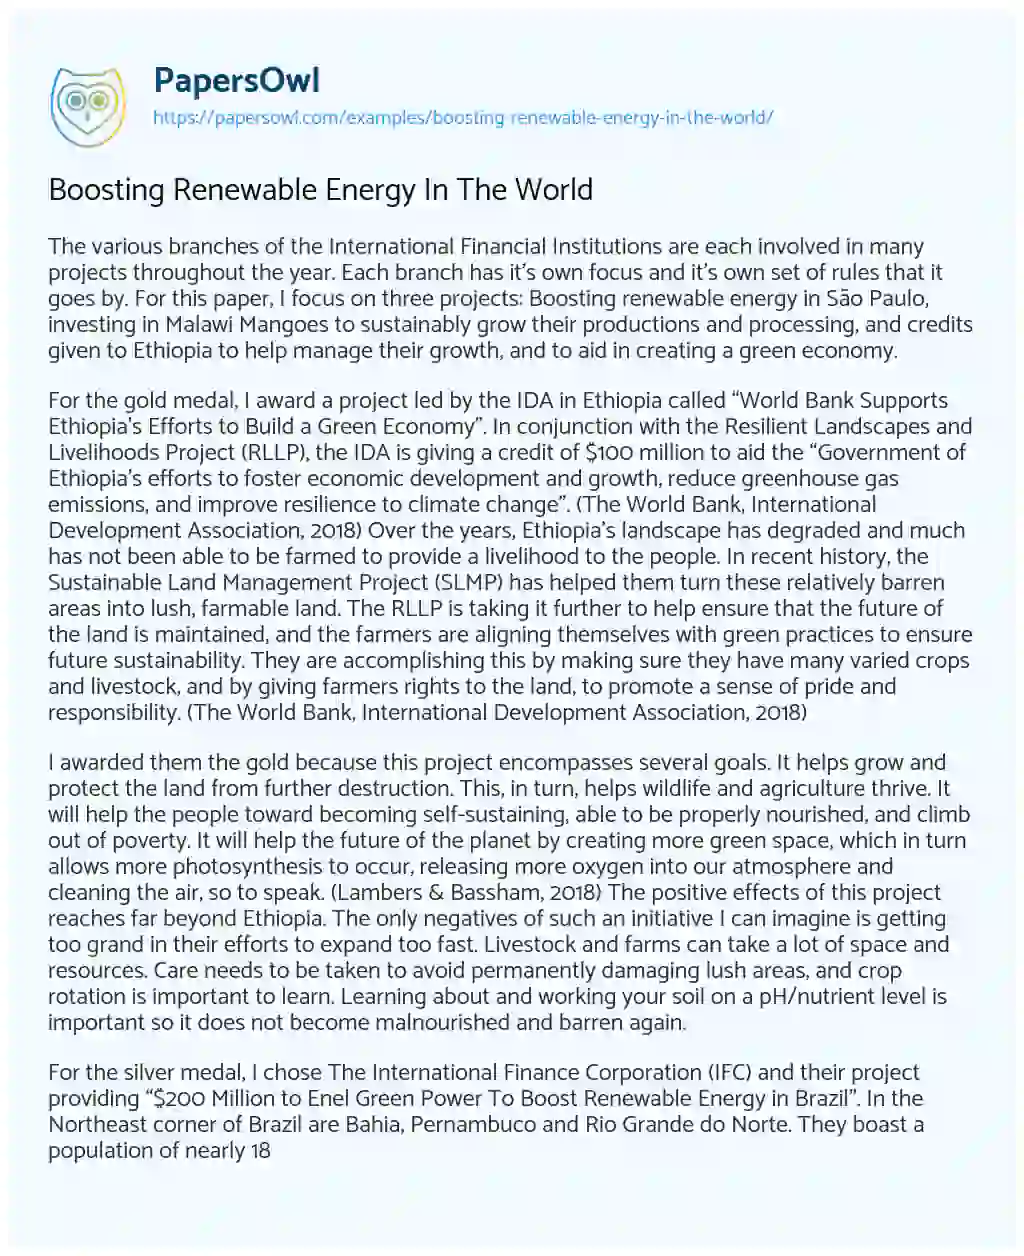 Essay on Boosting Renewable Energy in the World